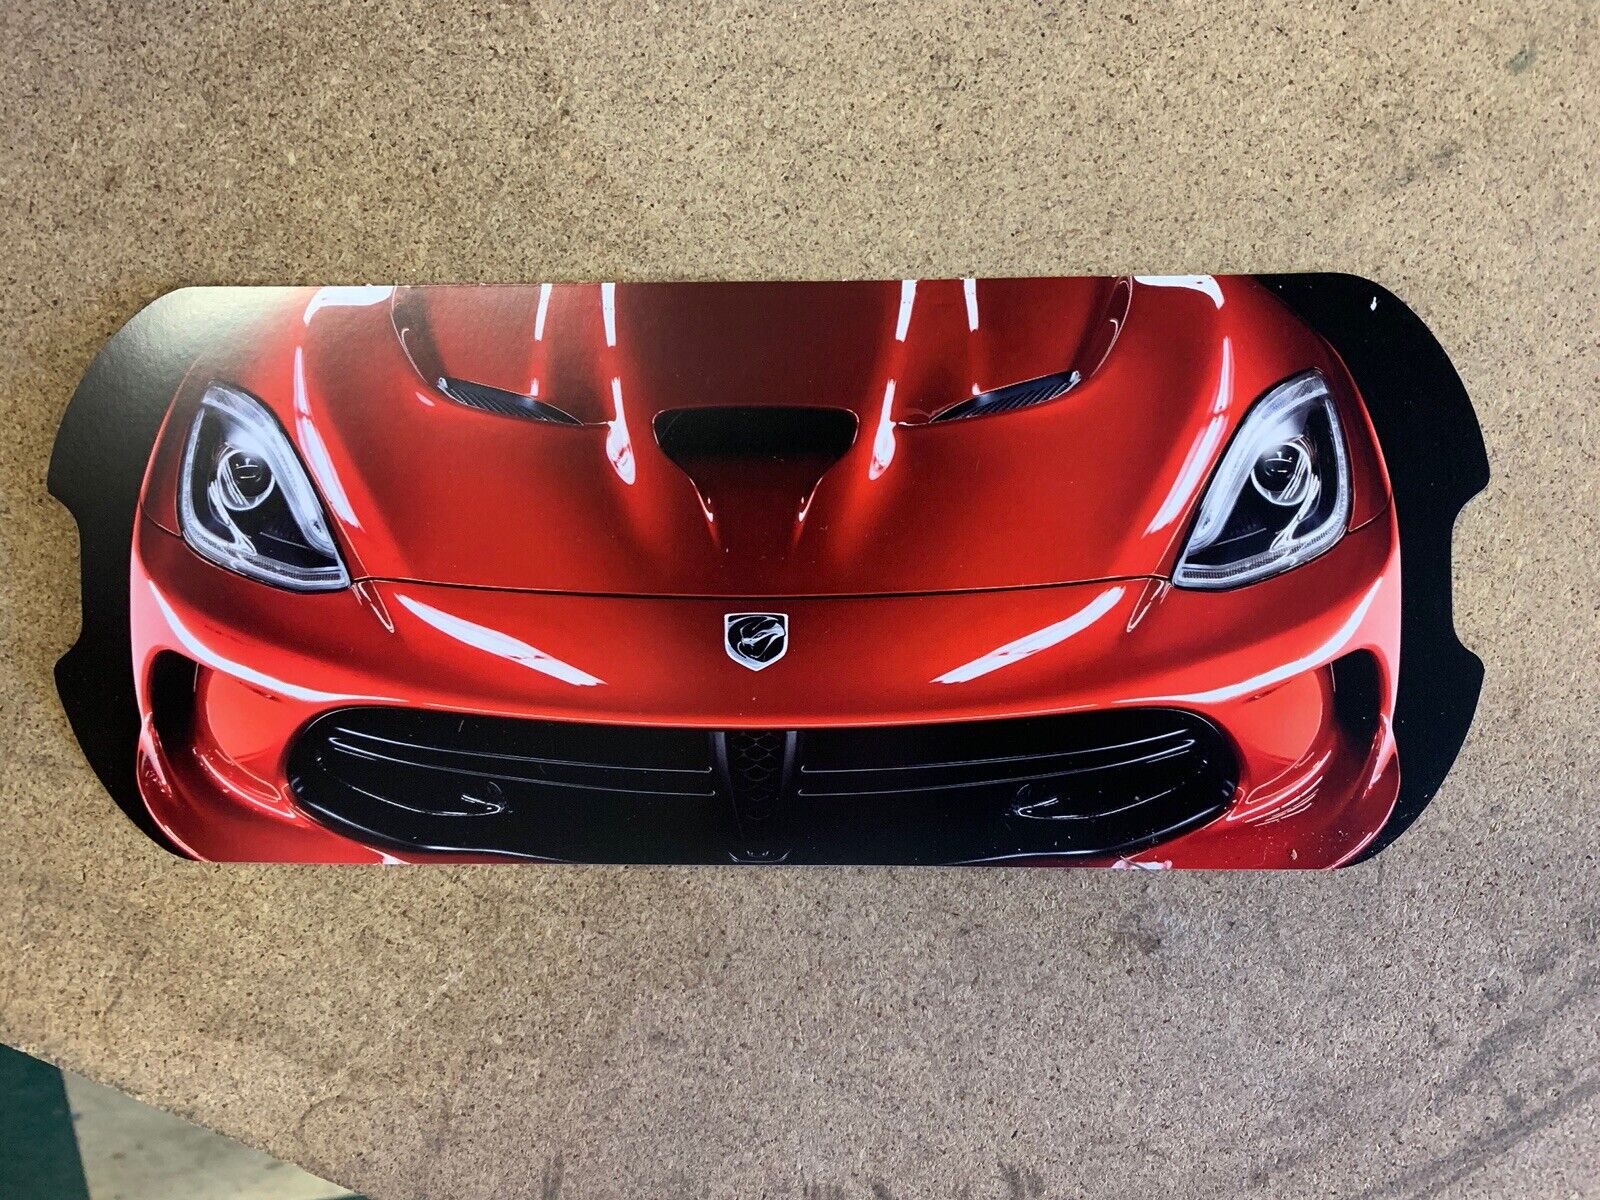 Barrett Jackson Auction Card For The Sale Of The 1st 2013 Dodge Viper 11”x5”